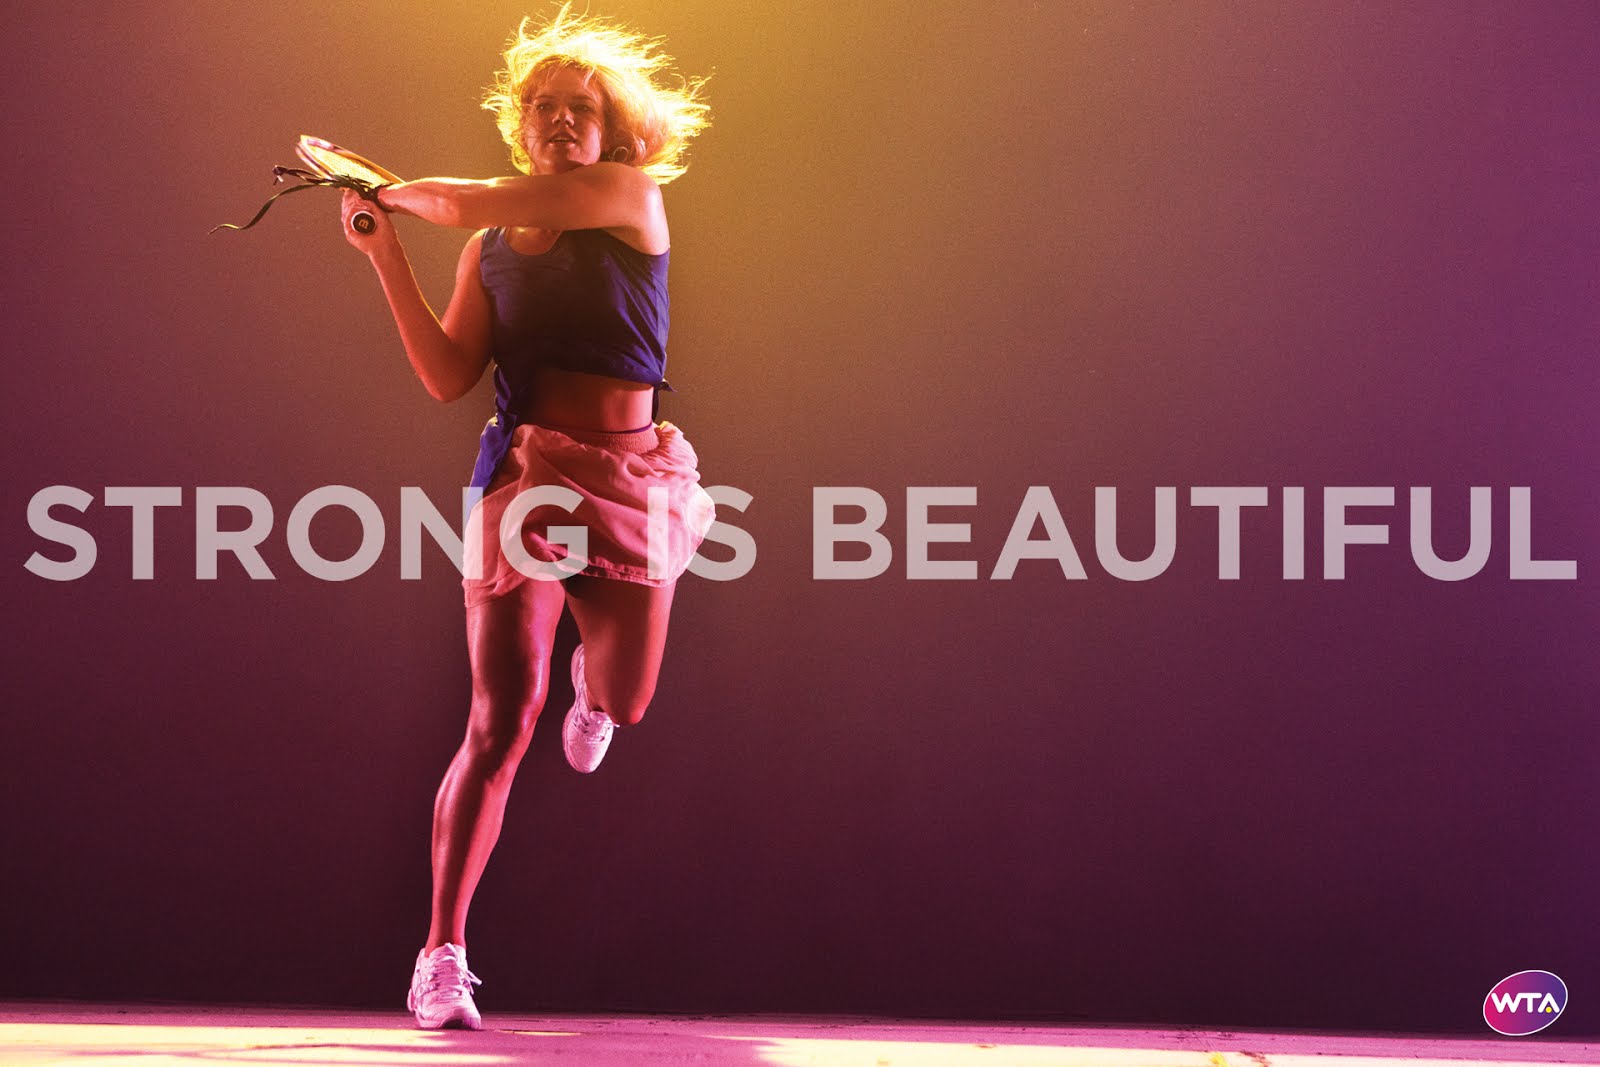 Strong is beautiful. Strong Beauty.